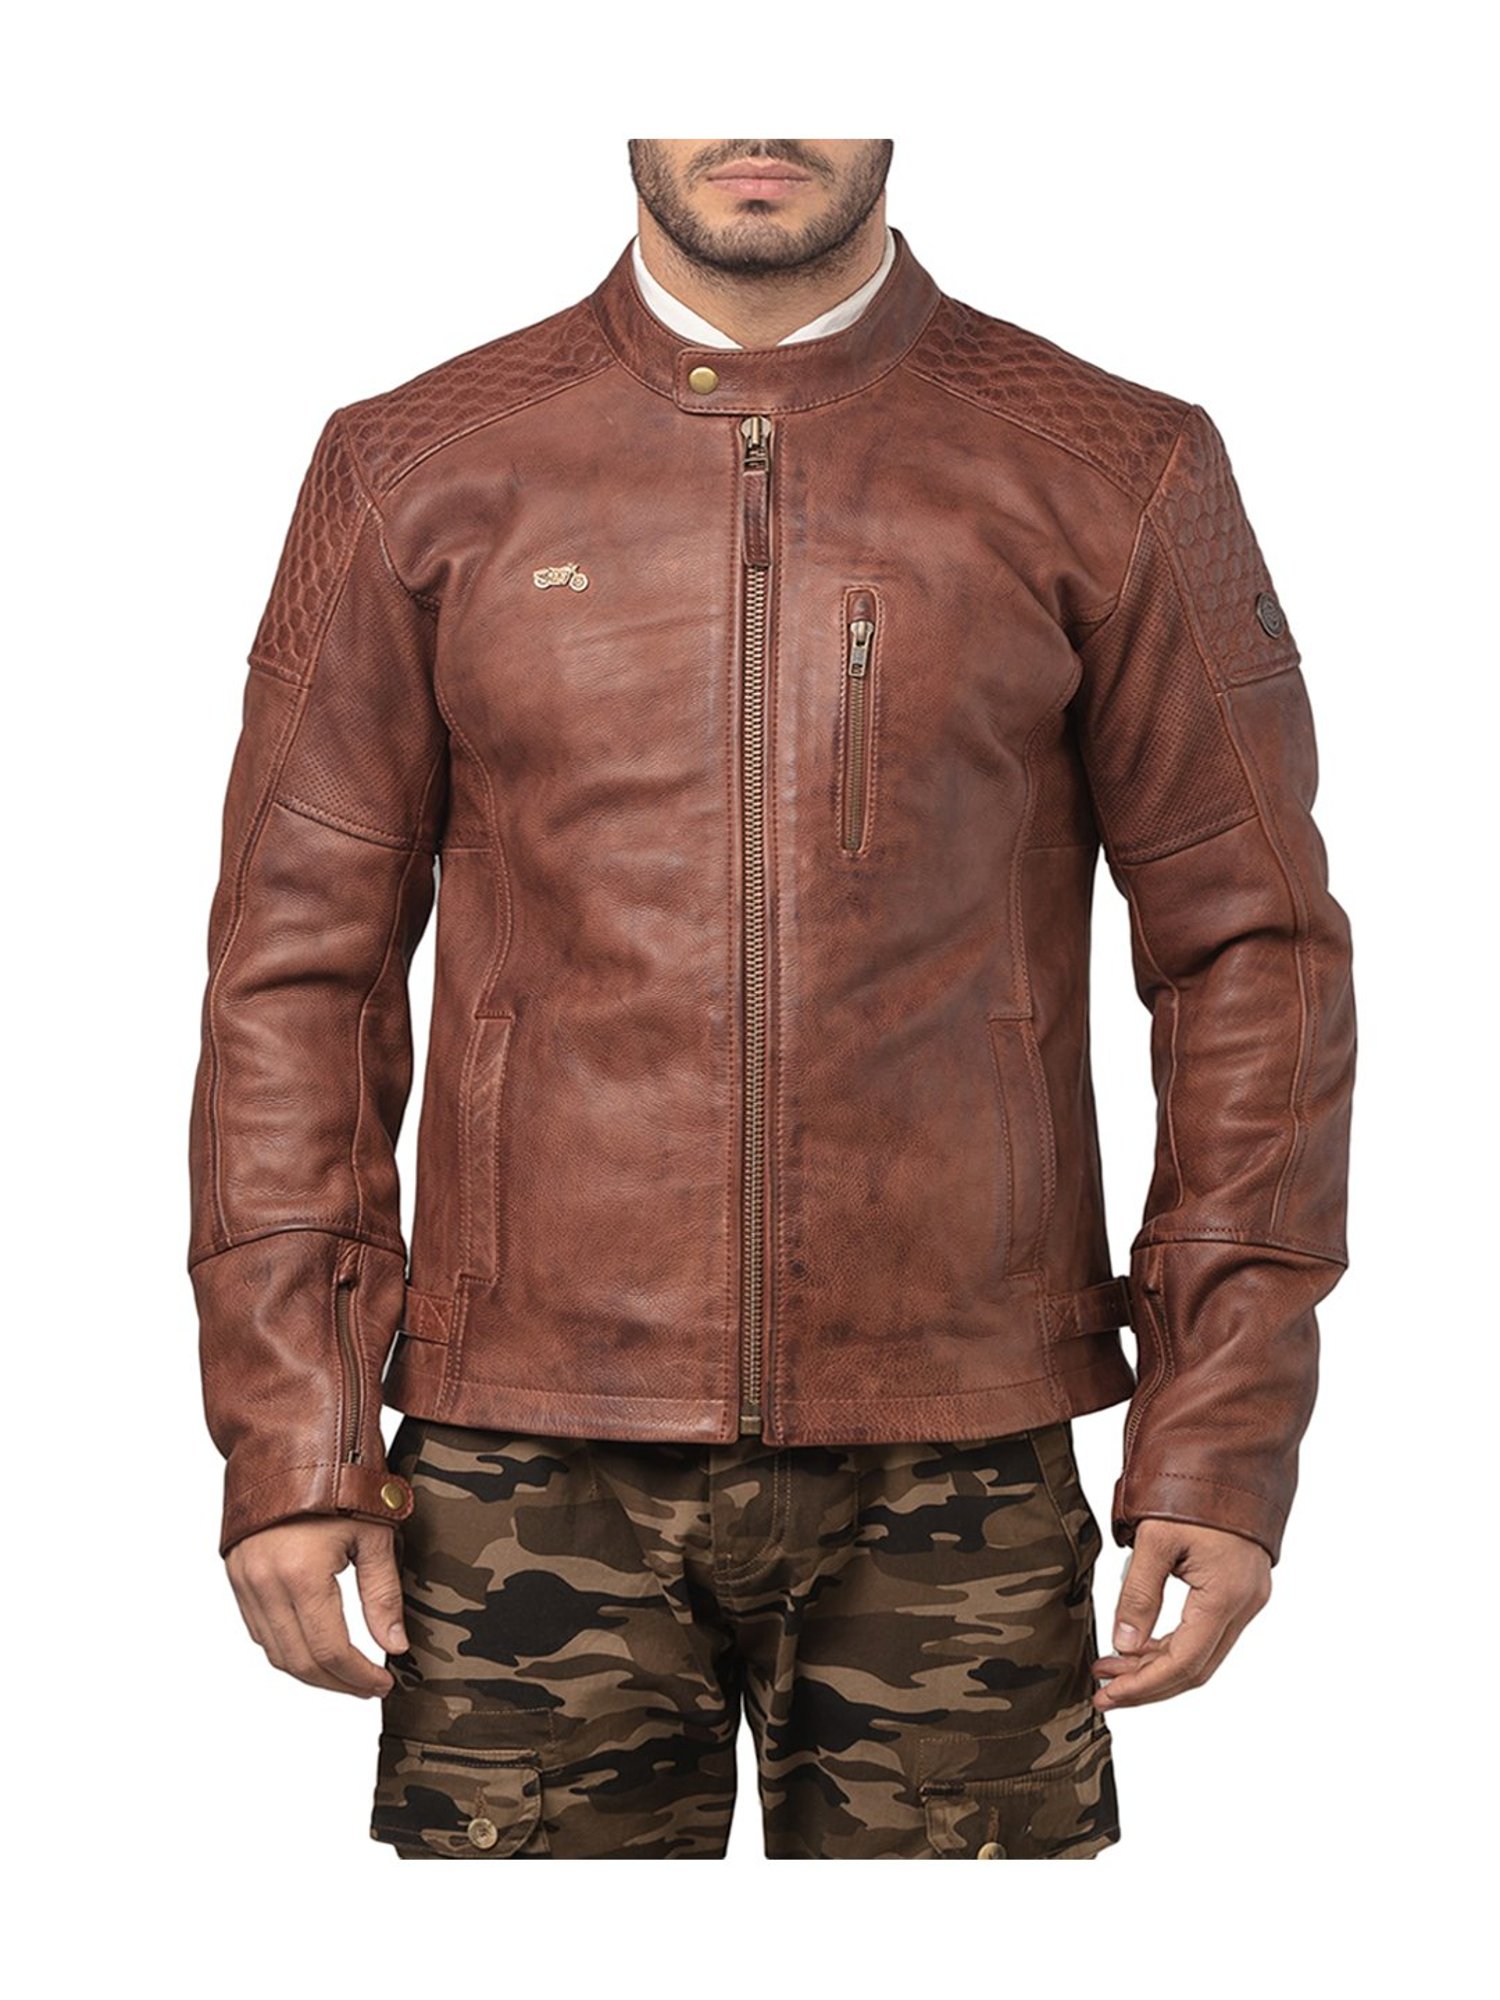 Review: Royal Enfield leather riding jacket | Team-BHP